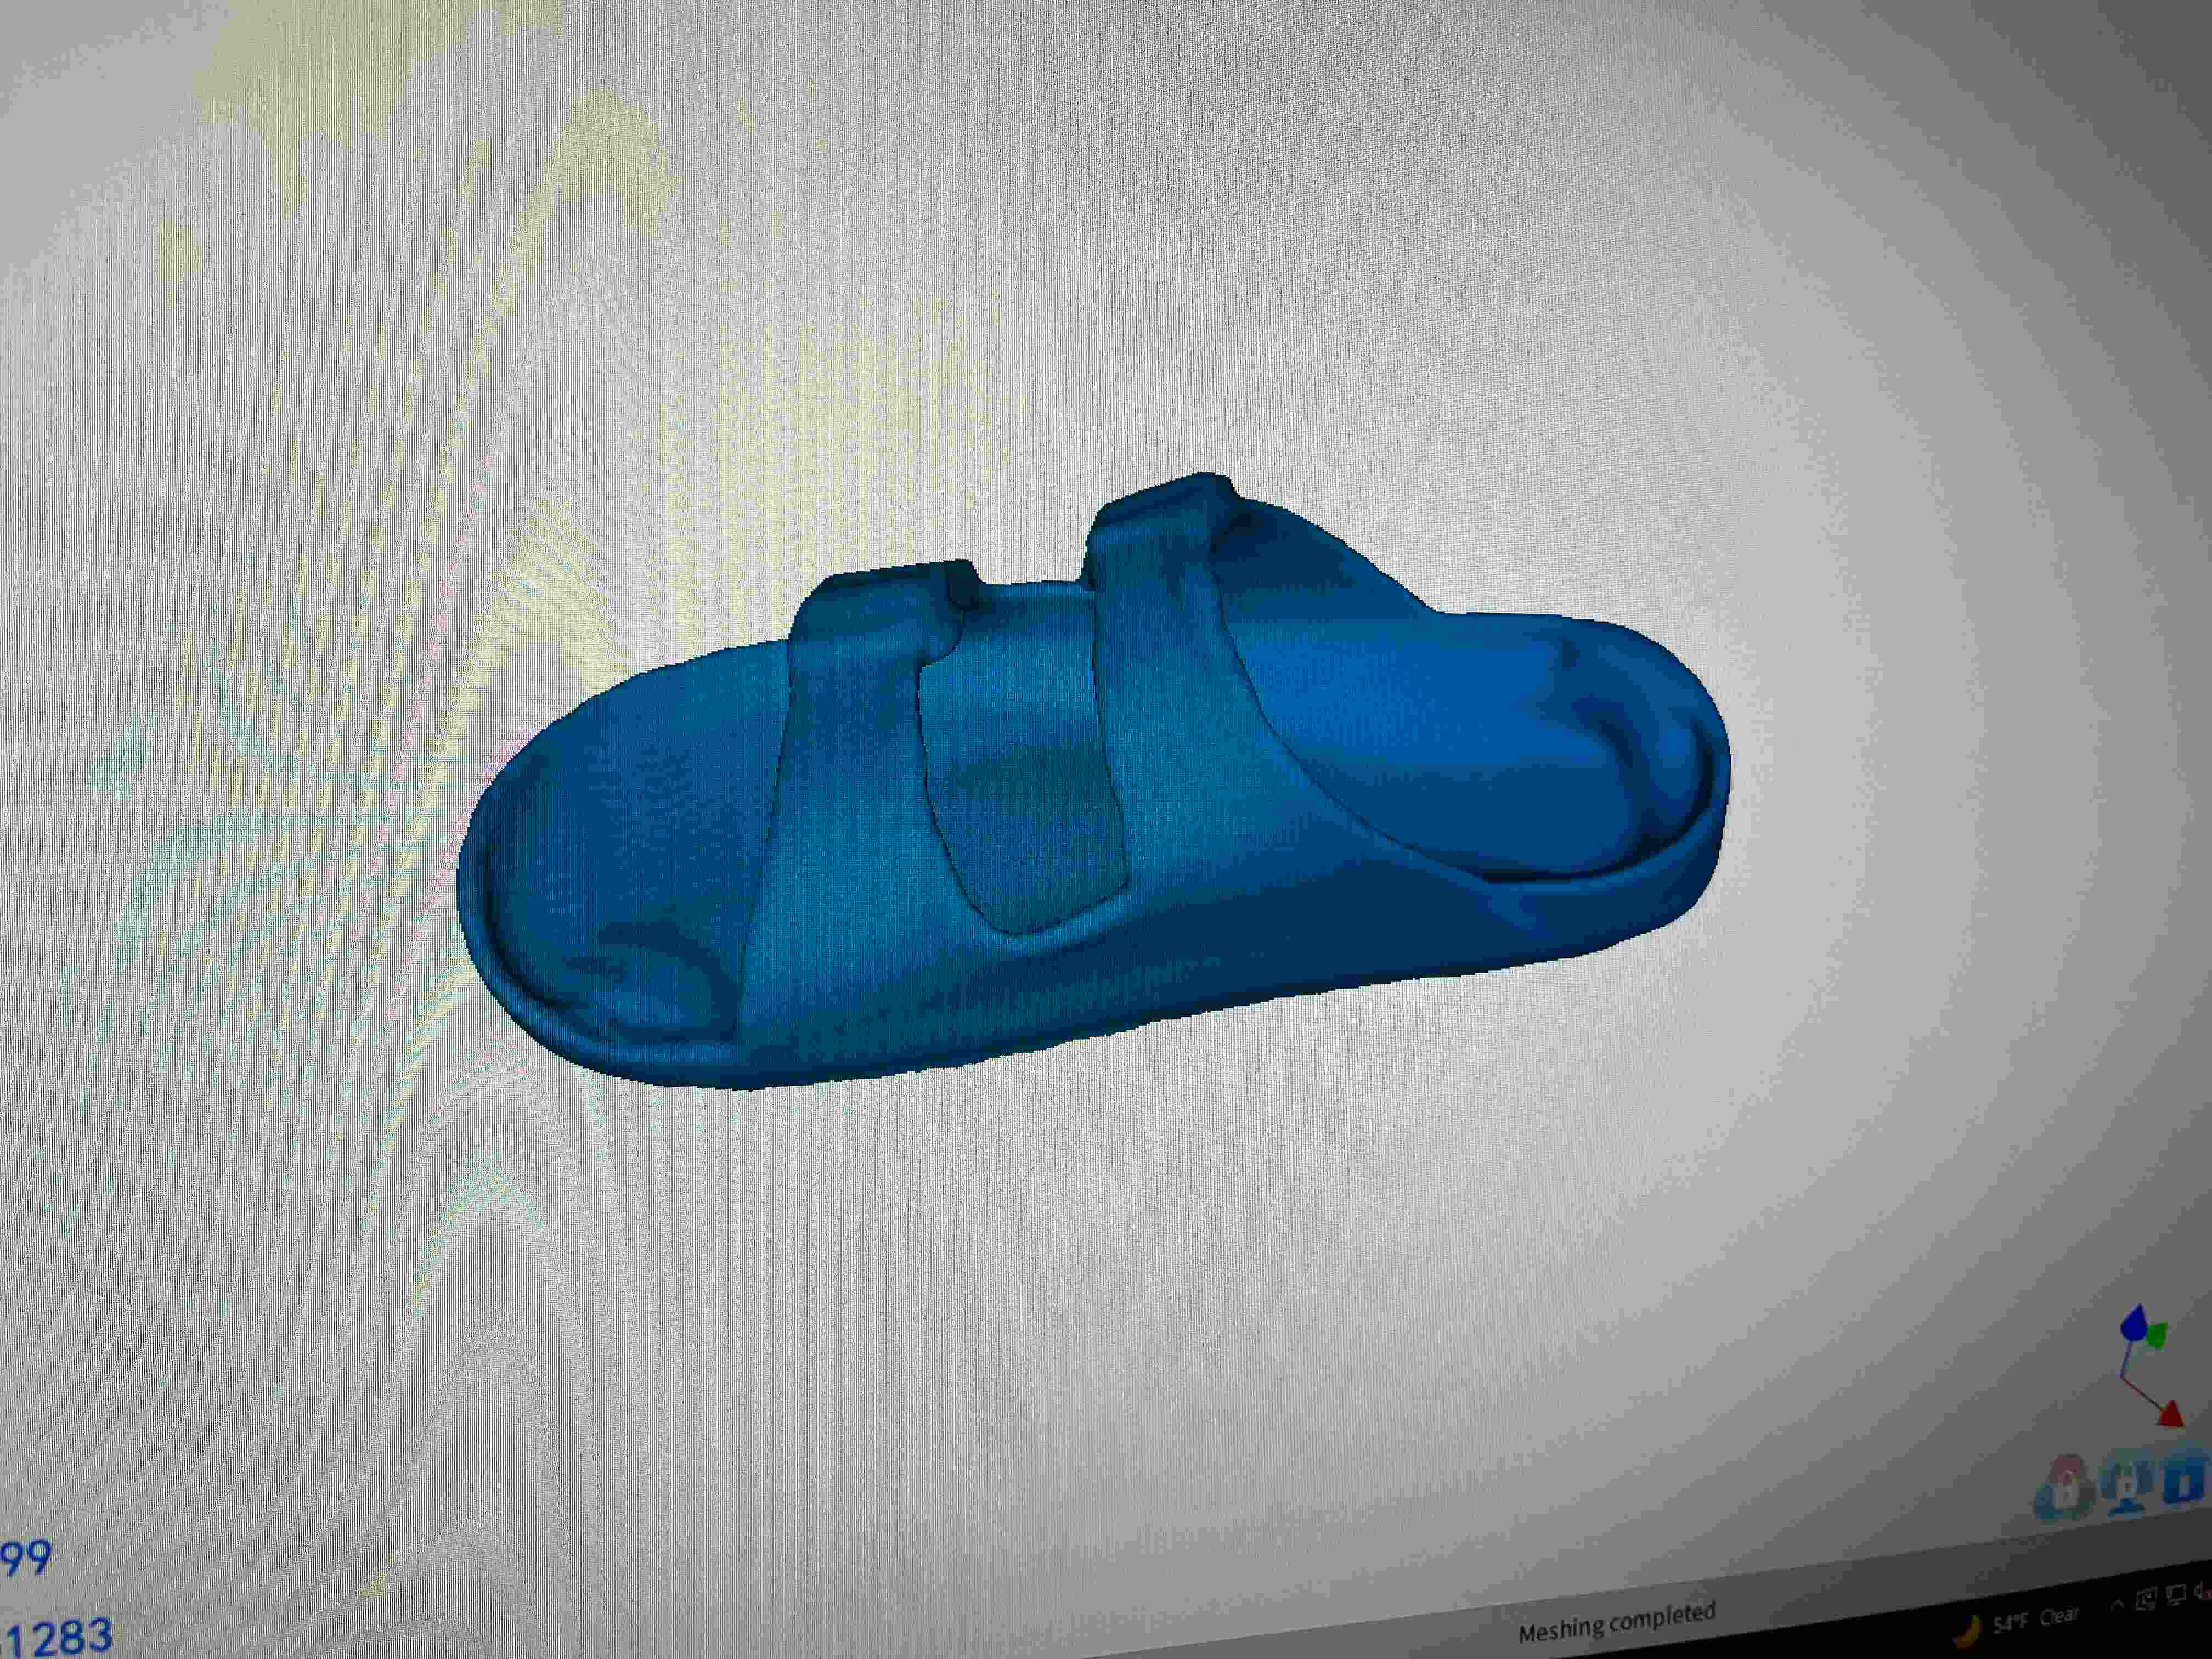 Scan of a shoe